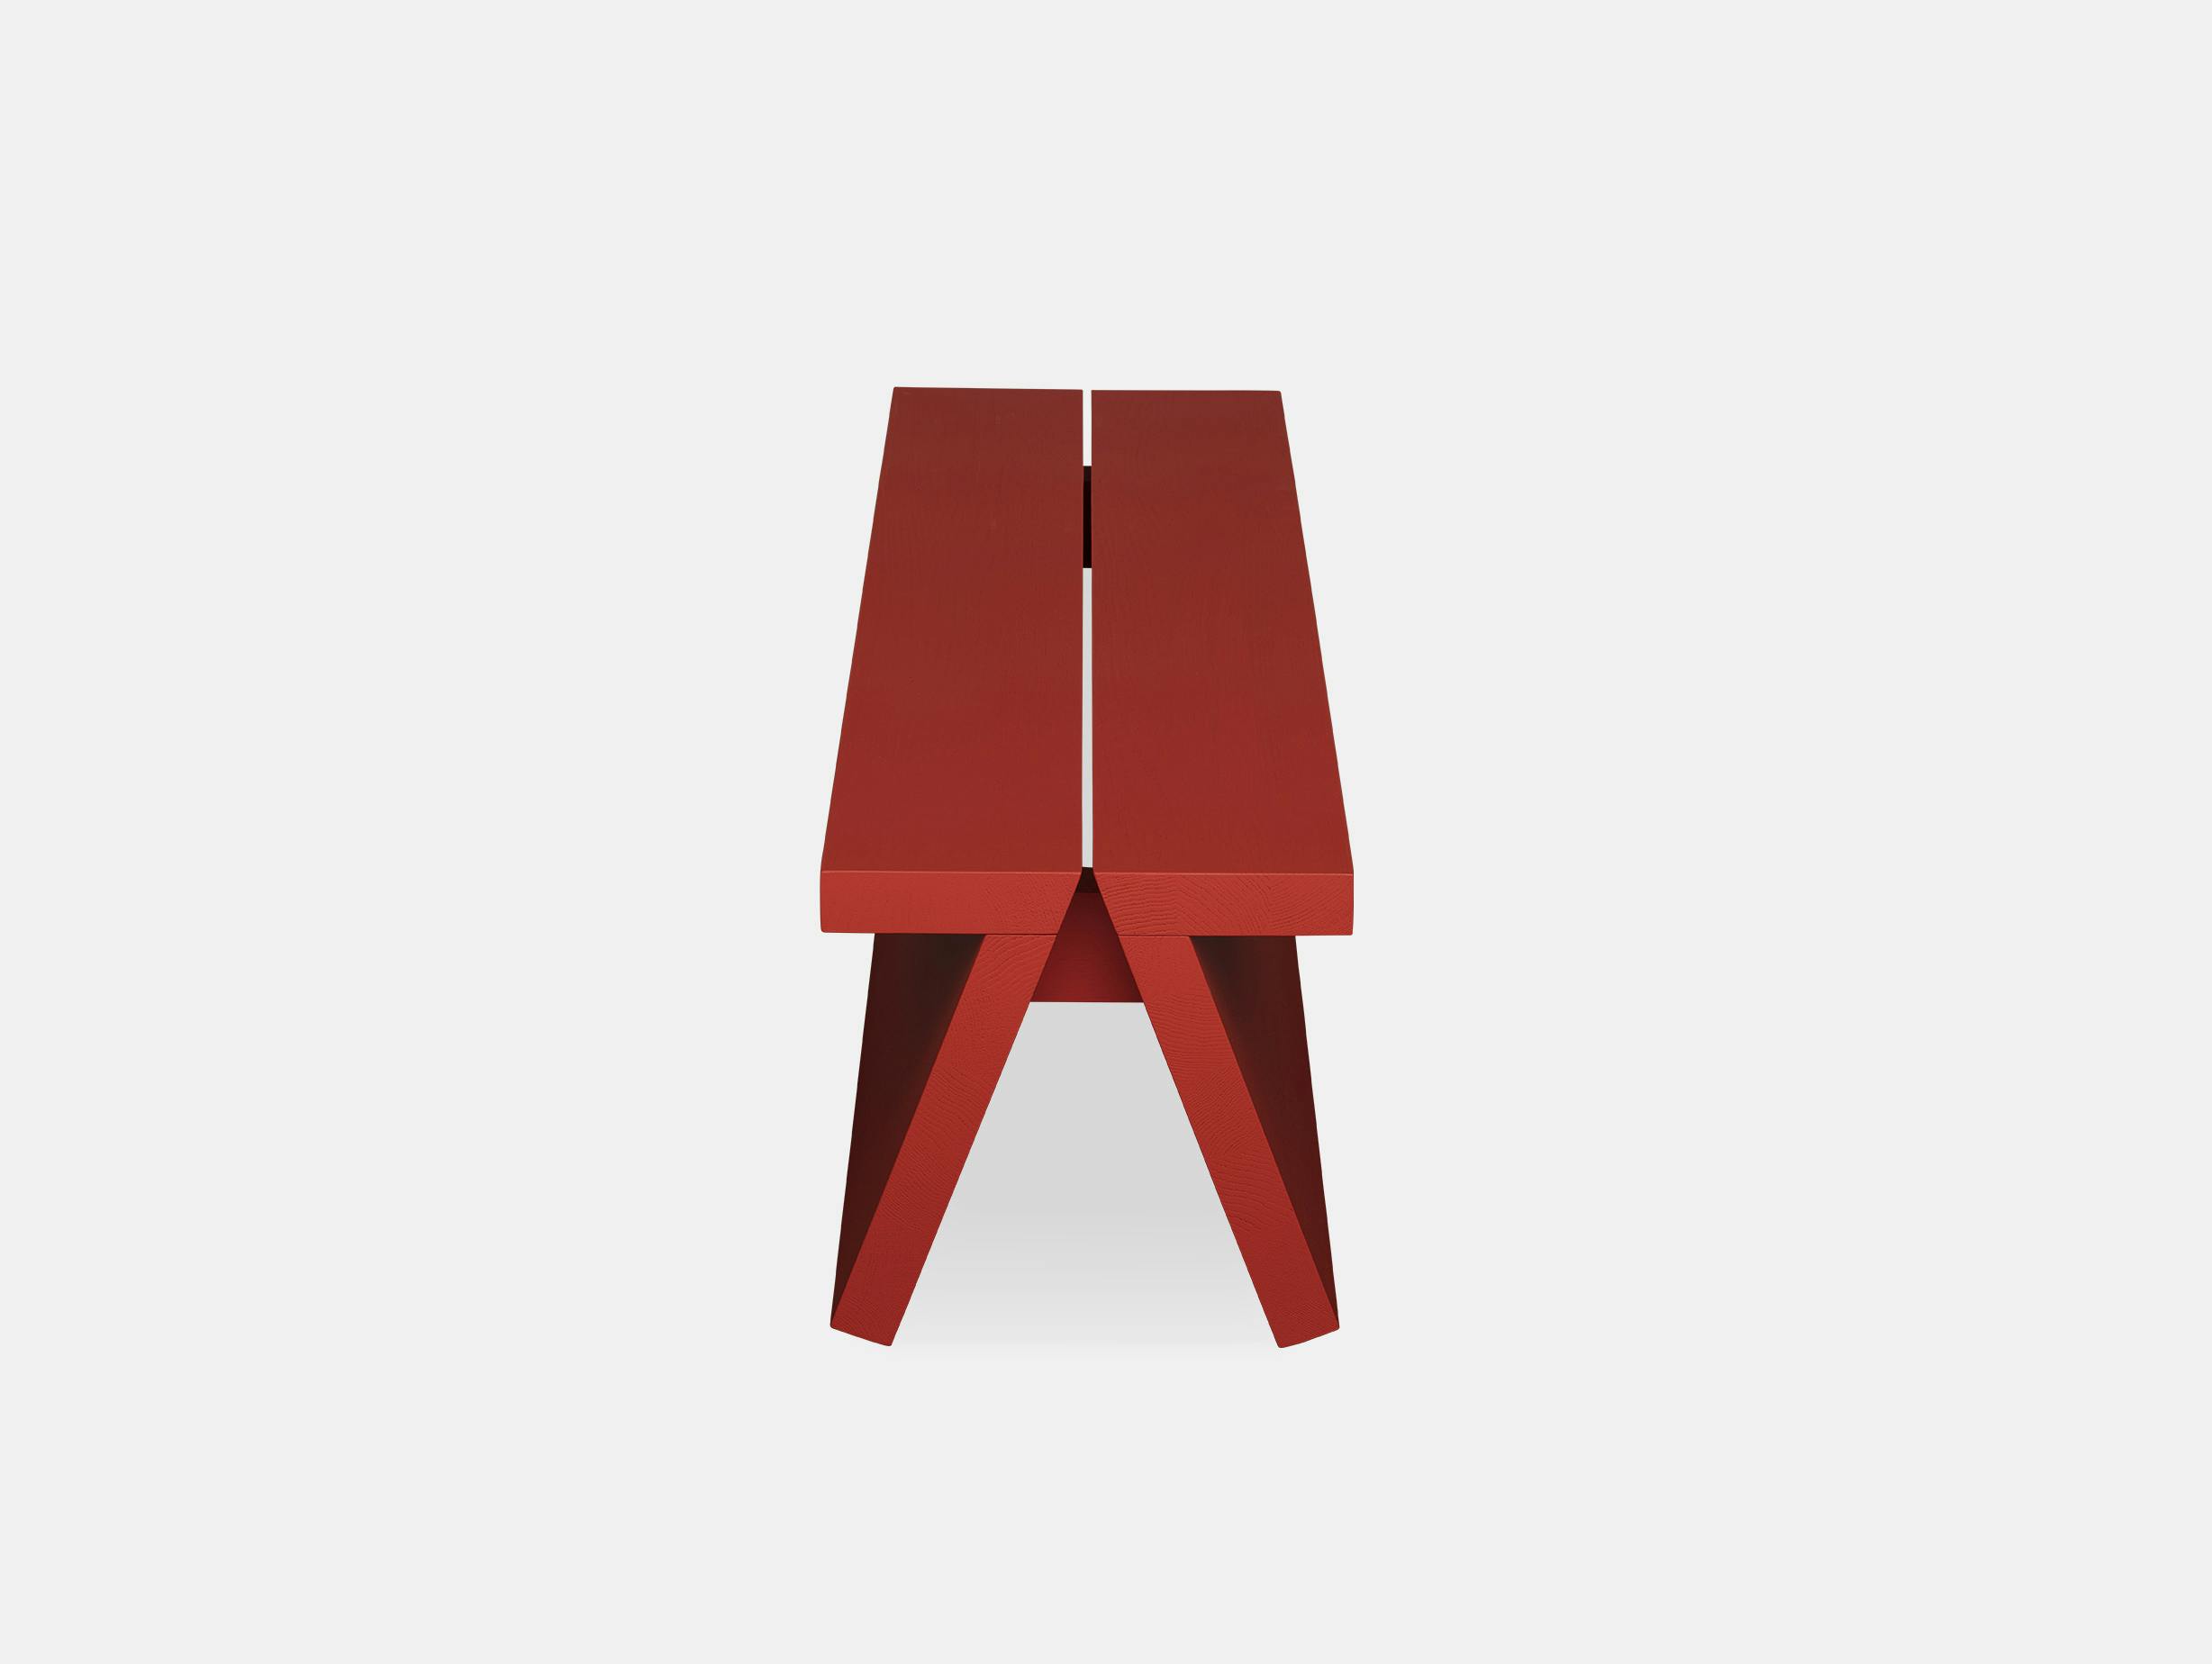 Fogia supersolid object 3 red bench 3